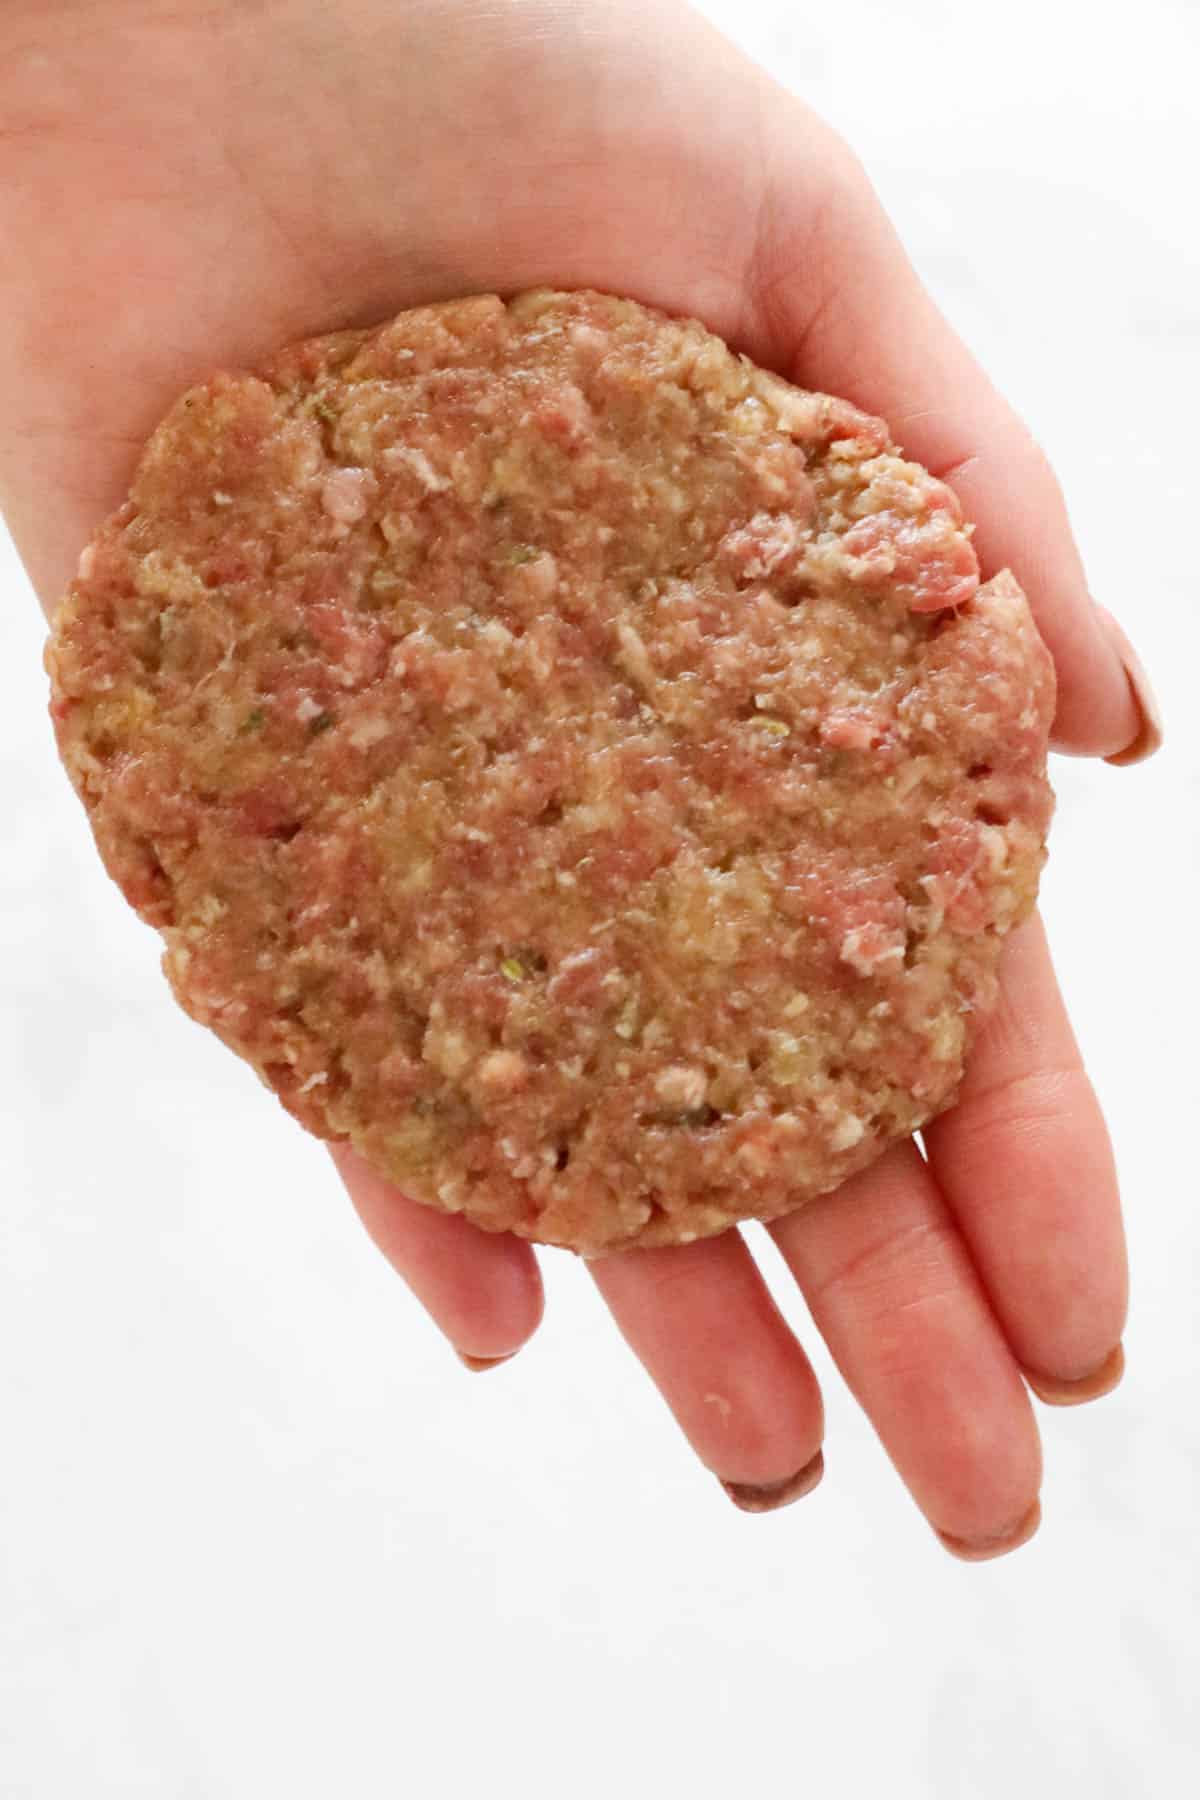 A hand holding a flat round meat patty.